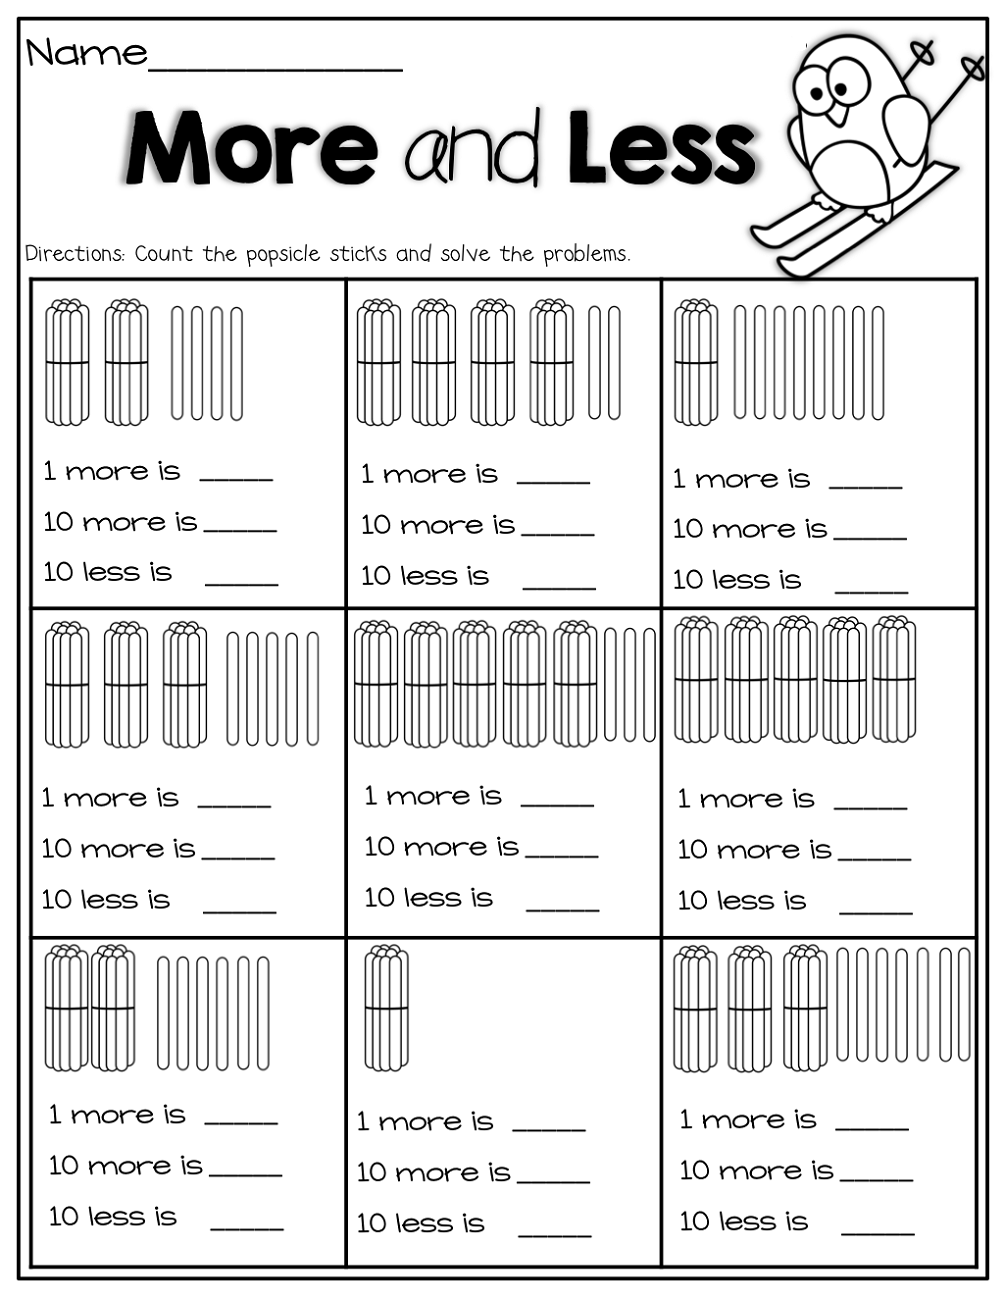 more and less worksheets activity